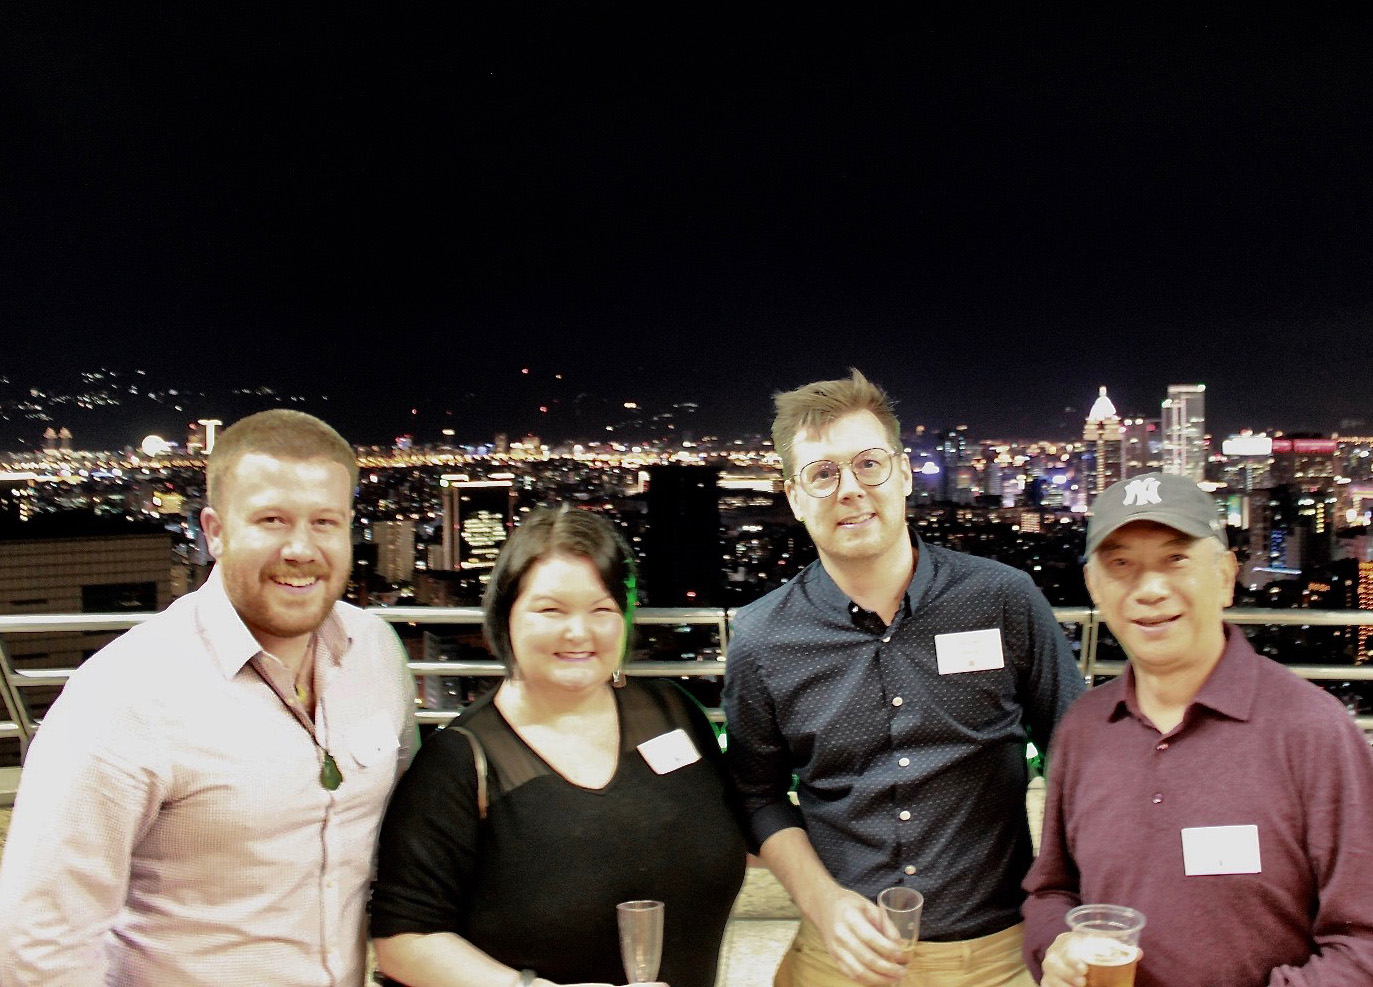 Ben standing oon a balcony at night with three colleagues with a city skyline at night in the background